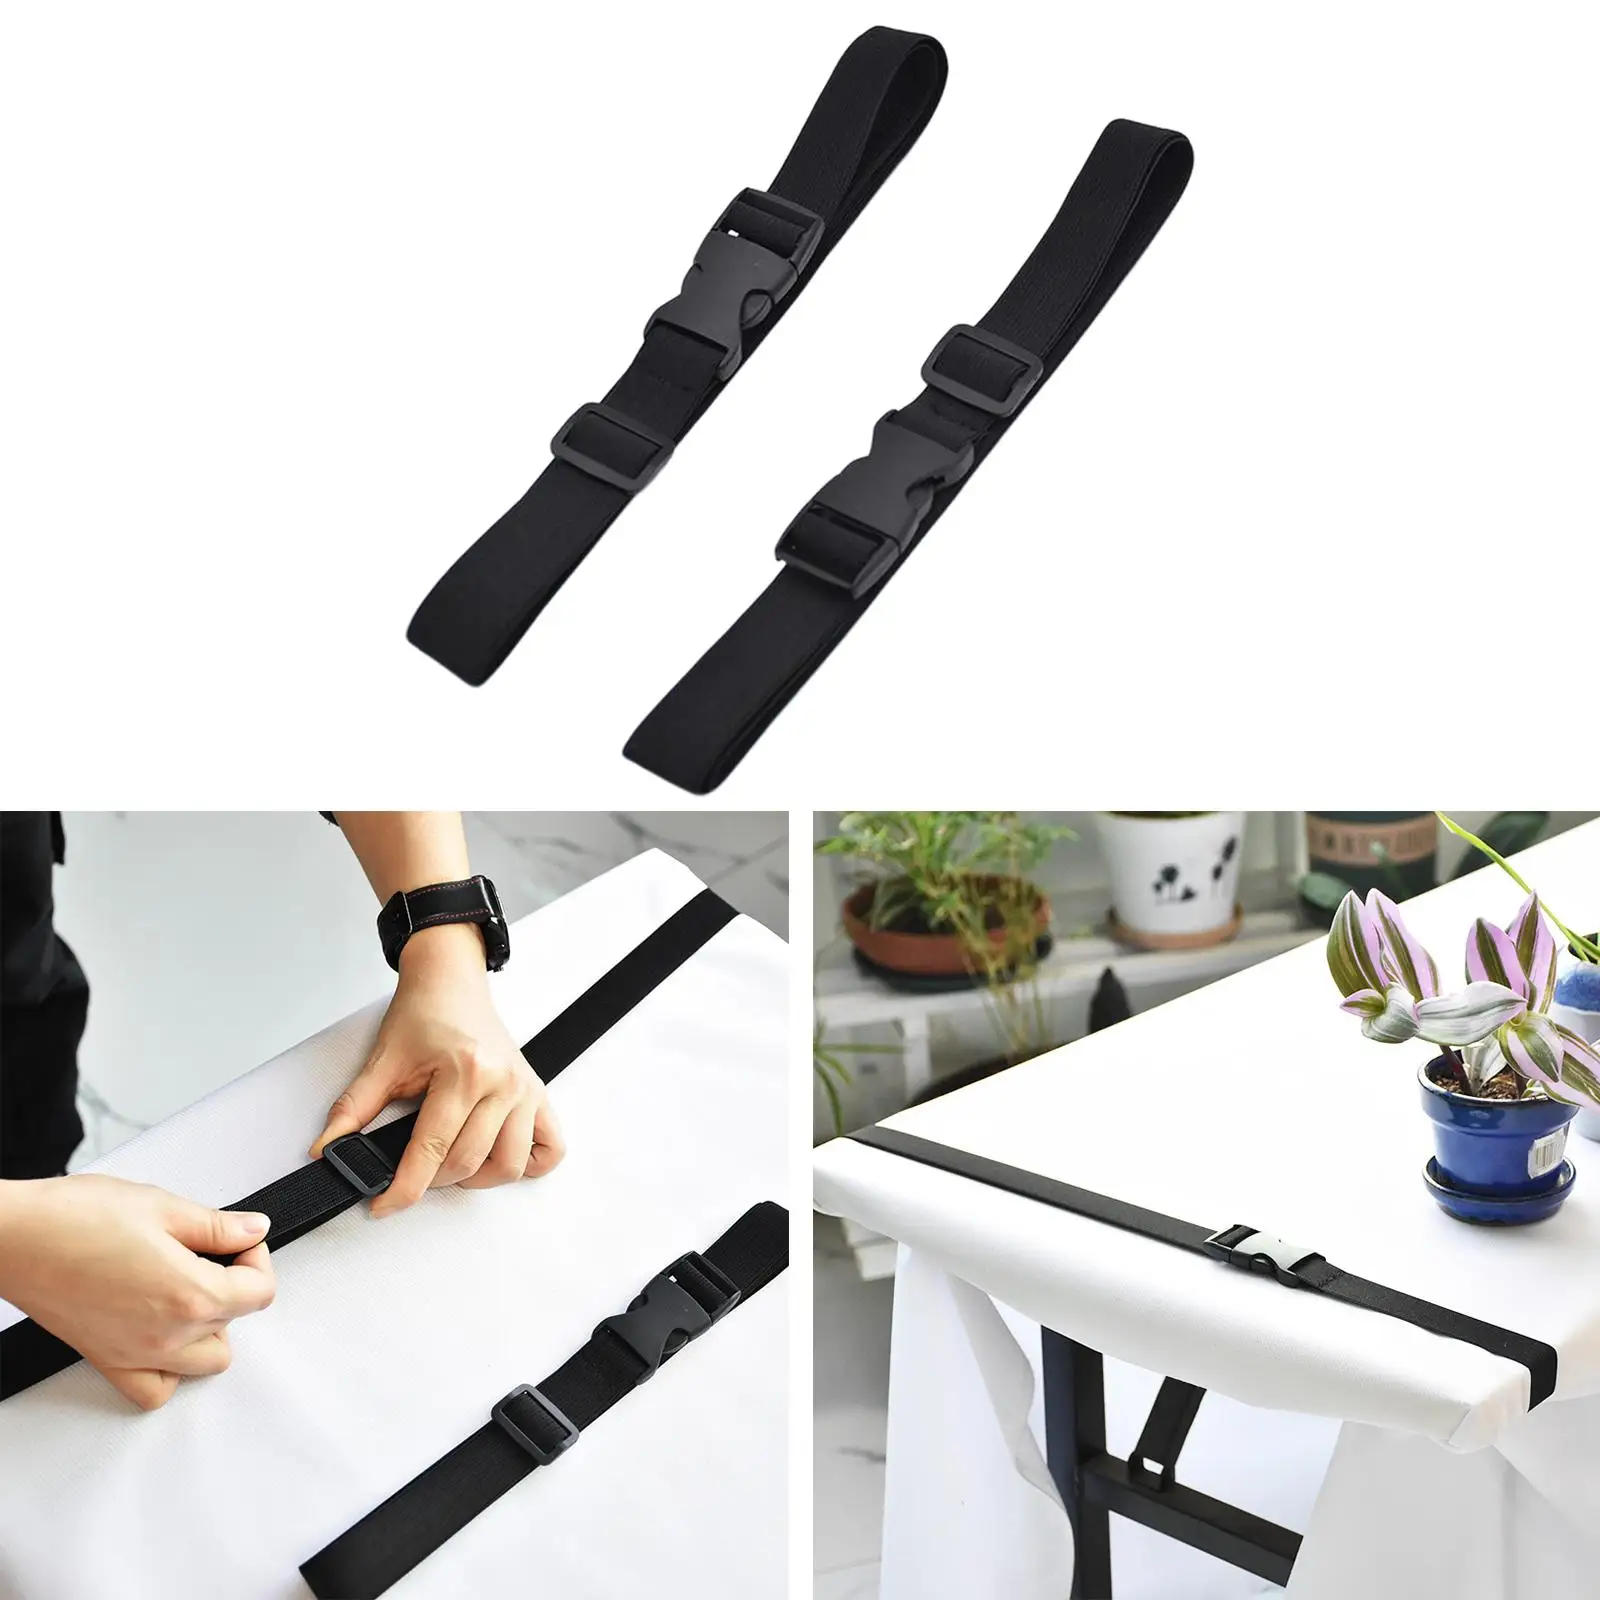 Long Tablecloth Cover Strape Easy to Use Universal Table Cloth Cover Clips for Camping Dining Room Restaurant Outside Home